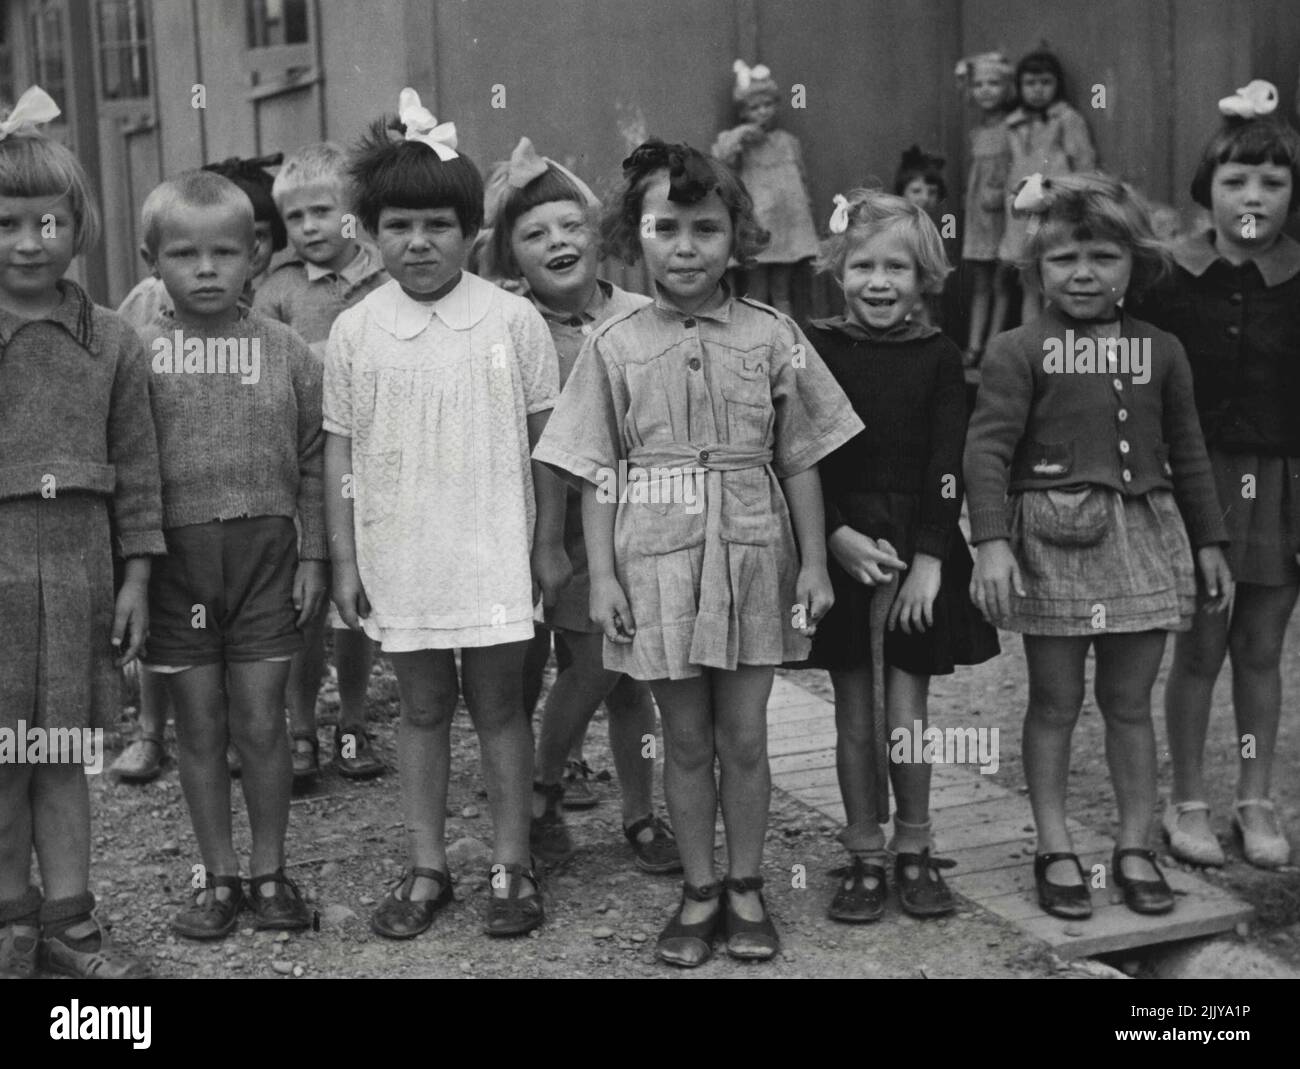 Polish Children In New Zealand -- These children were displaced from their homes in Poland by the war. After enduring great hardships they secured refuge in Iran and subsequently came to New Zealand. This series of Photographs shows something of their temporary home at Pahiatua, North Island. December 28, 1949. (Photo by New Zealand Department Of Internal Affairs). Stock Photo